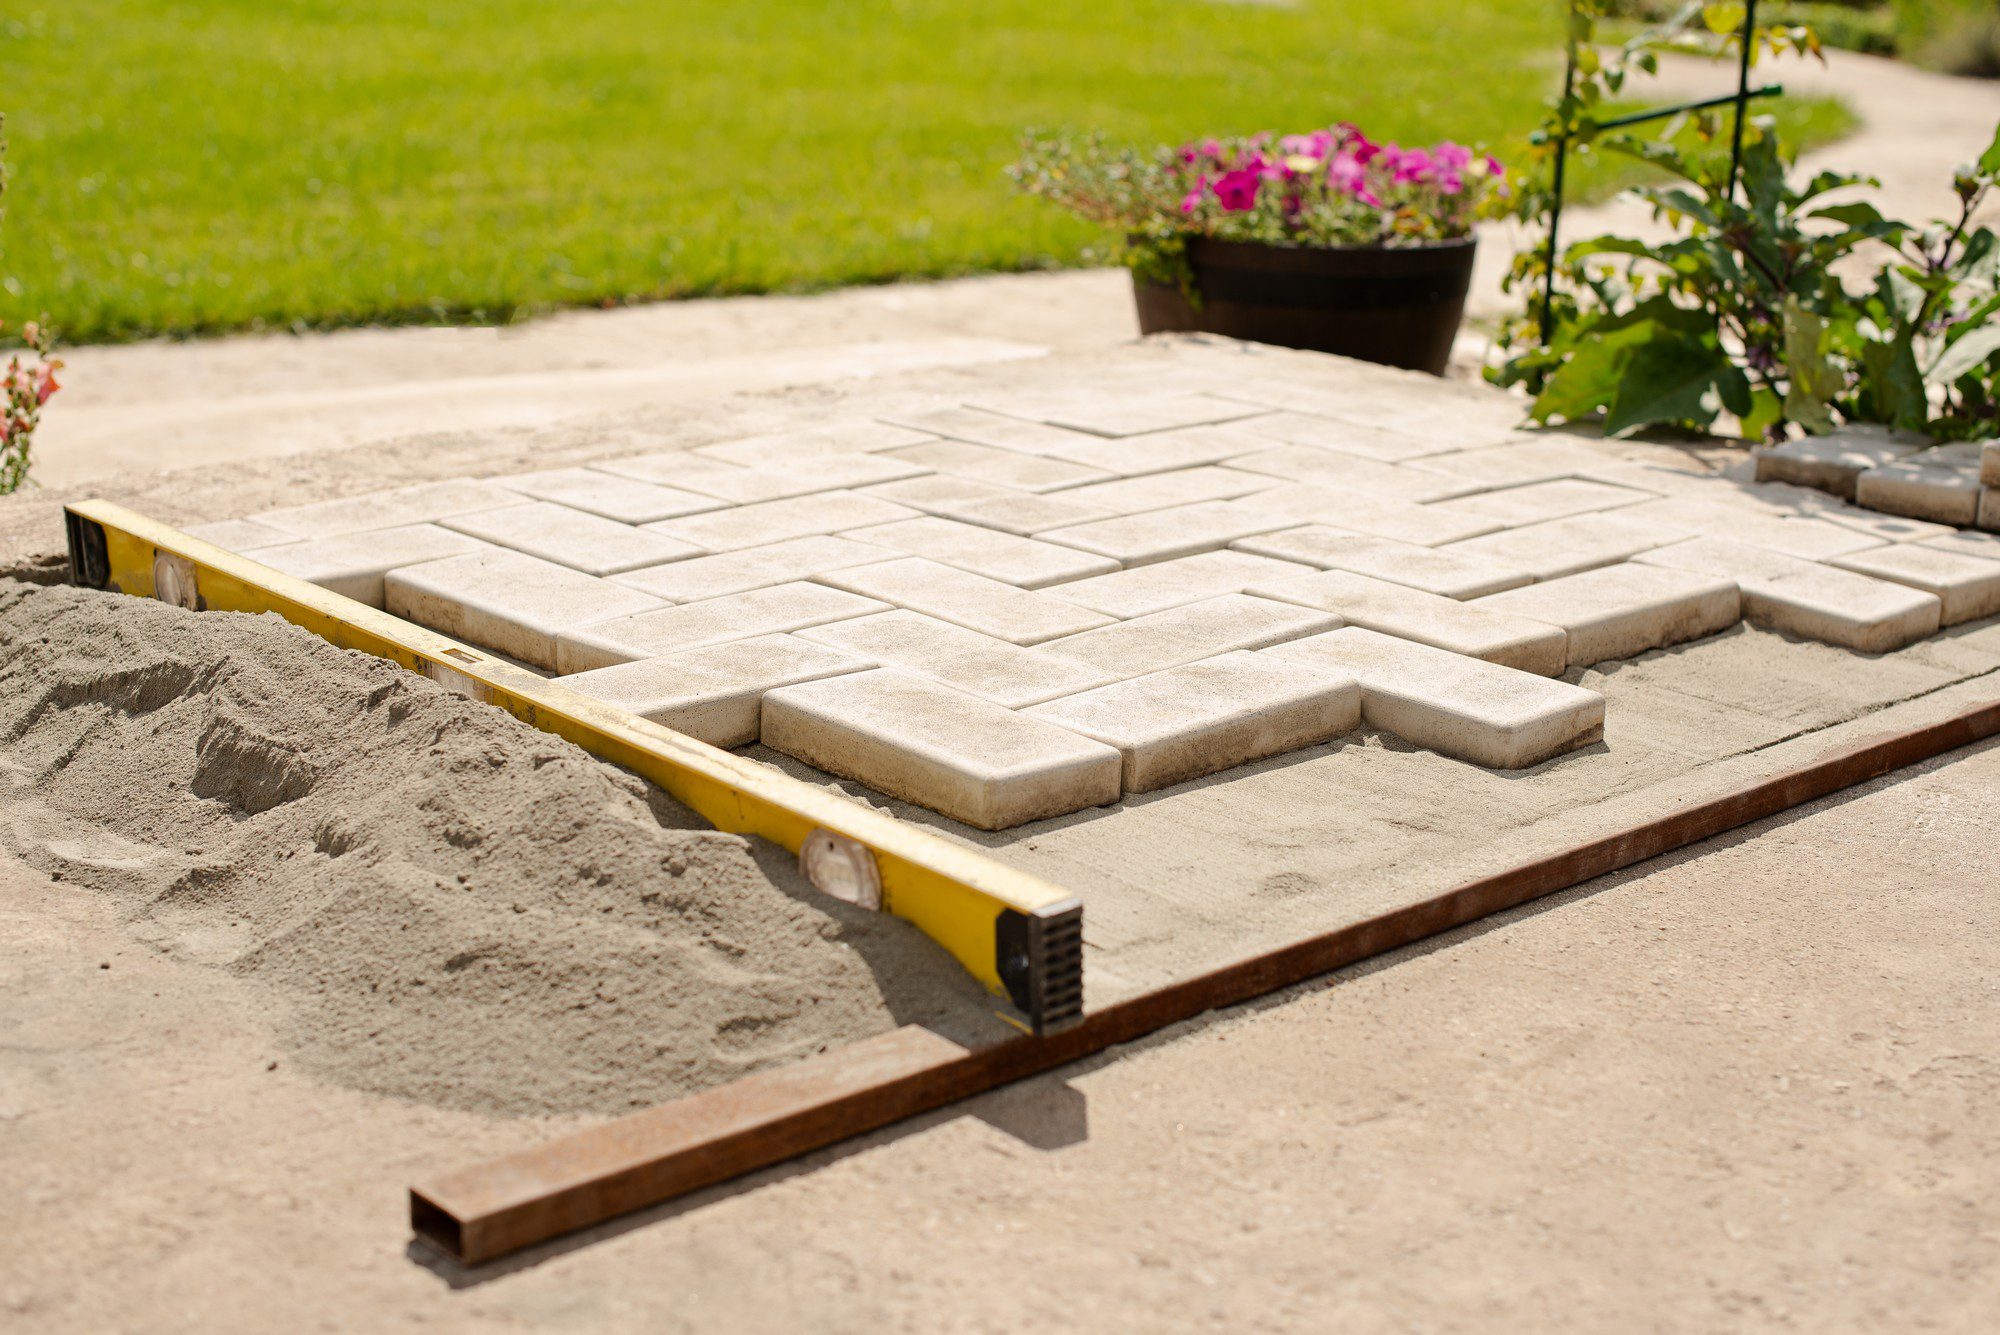 The image depicts a work in progress of laying paving stones to create a patio or footpath. A level, typically used in construction to cheque that surfaces are horizontal, is resting on the unfinished paving stones to ensure they are being laid evenly. Some of the stones have not been placed yet and are stacked to the side. Beneath the stones, there is a layer of sand, which is commonly used as a base for pavers to help with leveling and drainage. There are also visible metal or wooden edges that act as guides or forms to ensure straightness and to retain the shape of the area being paved. In the background, you can see a healthy green lawn and some flowering plants in a planter, suggesting that this work is taking place in a garden or backyard setting.